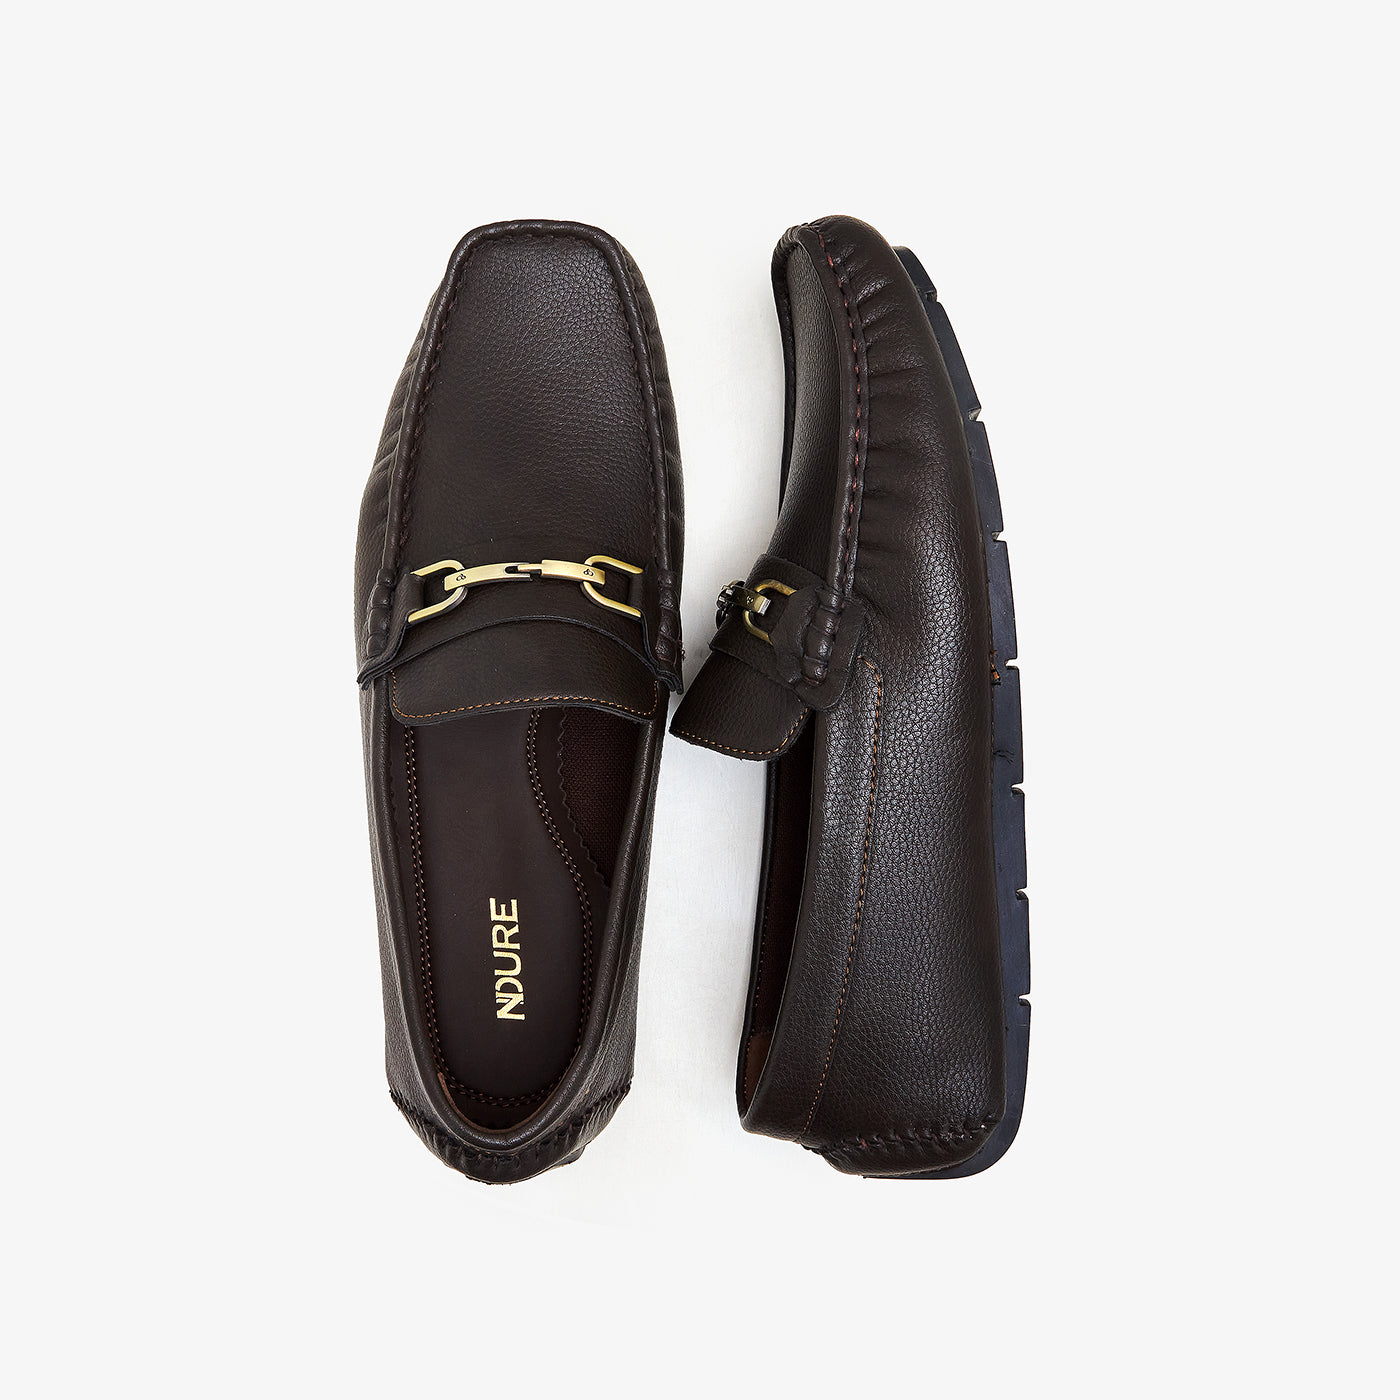 Loafer shoes price in Lahore